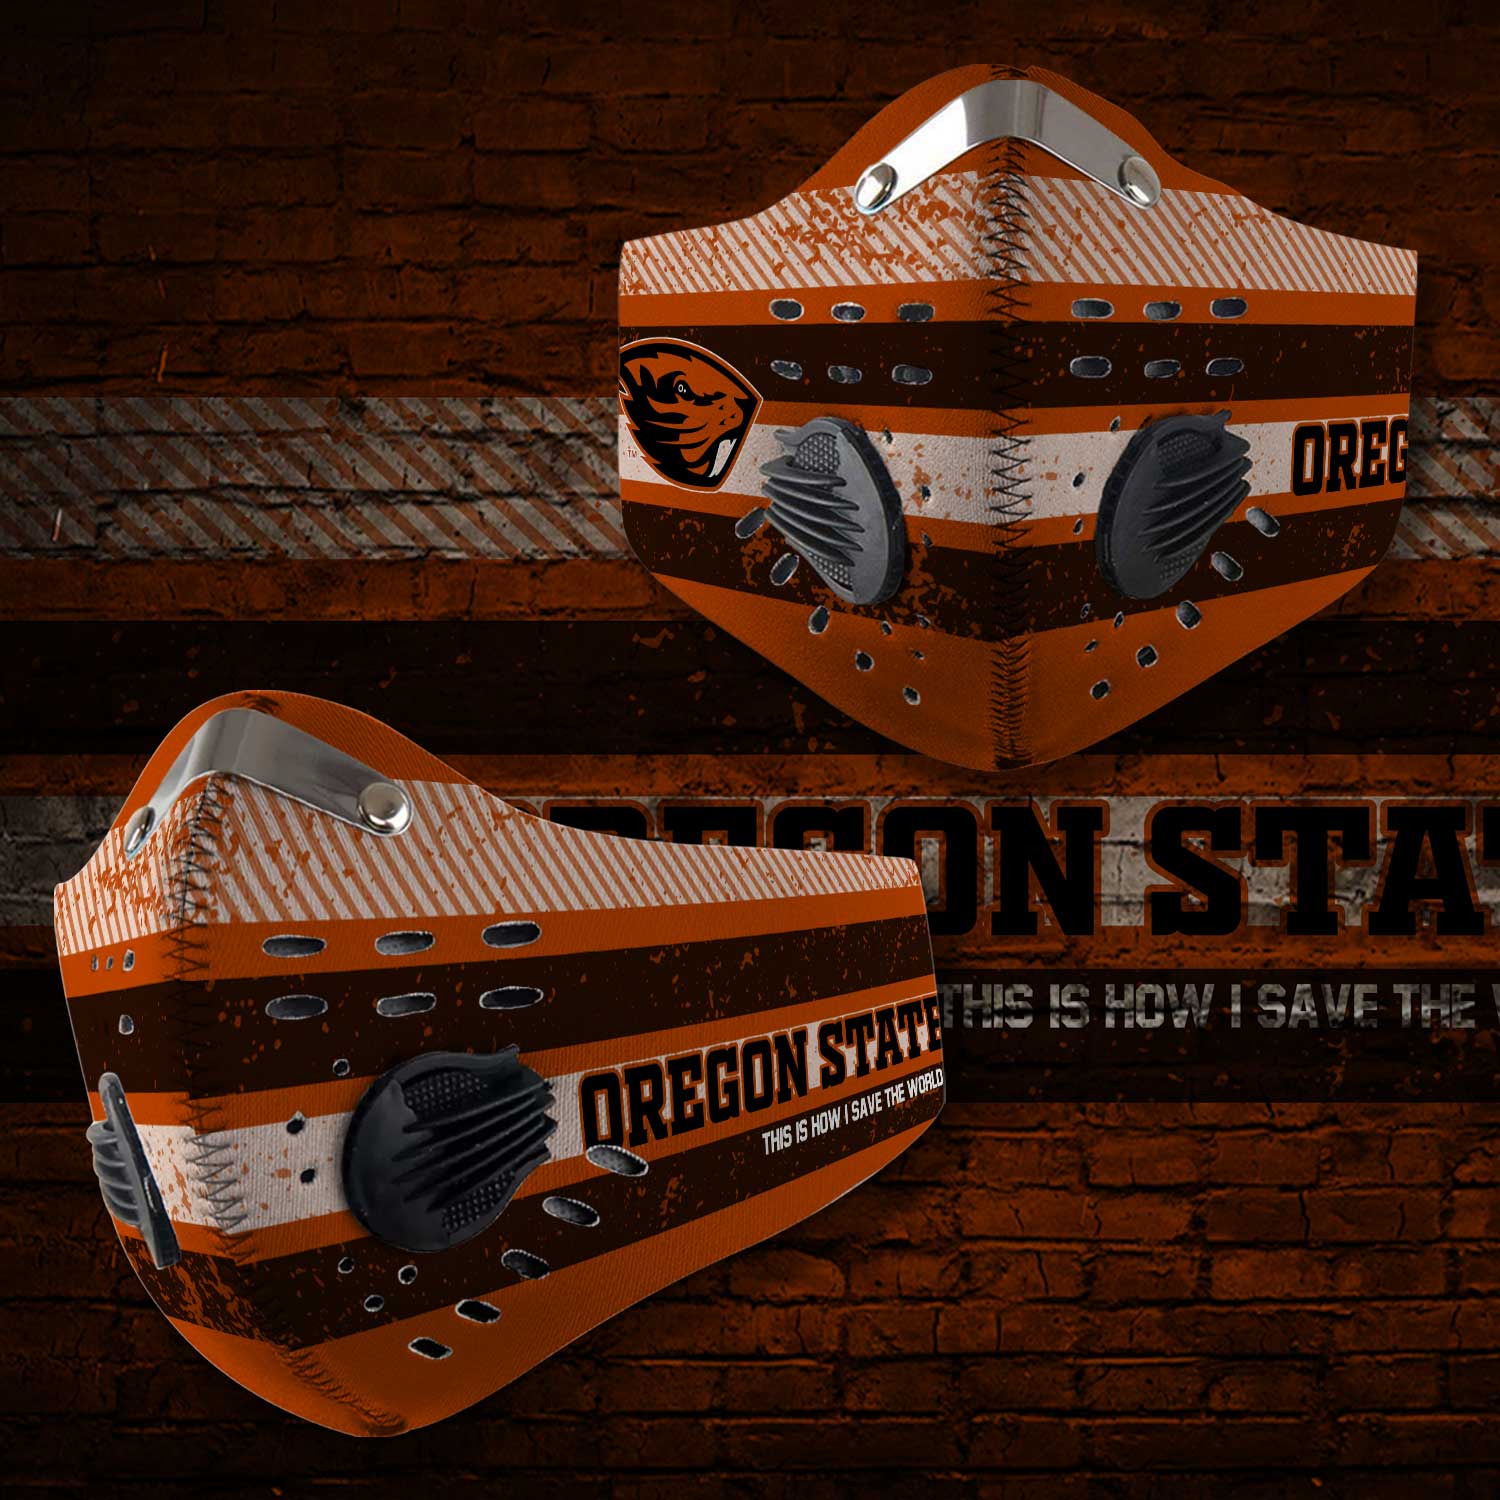 Oregon state beavers this is how i save the world face mask 1